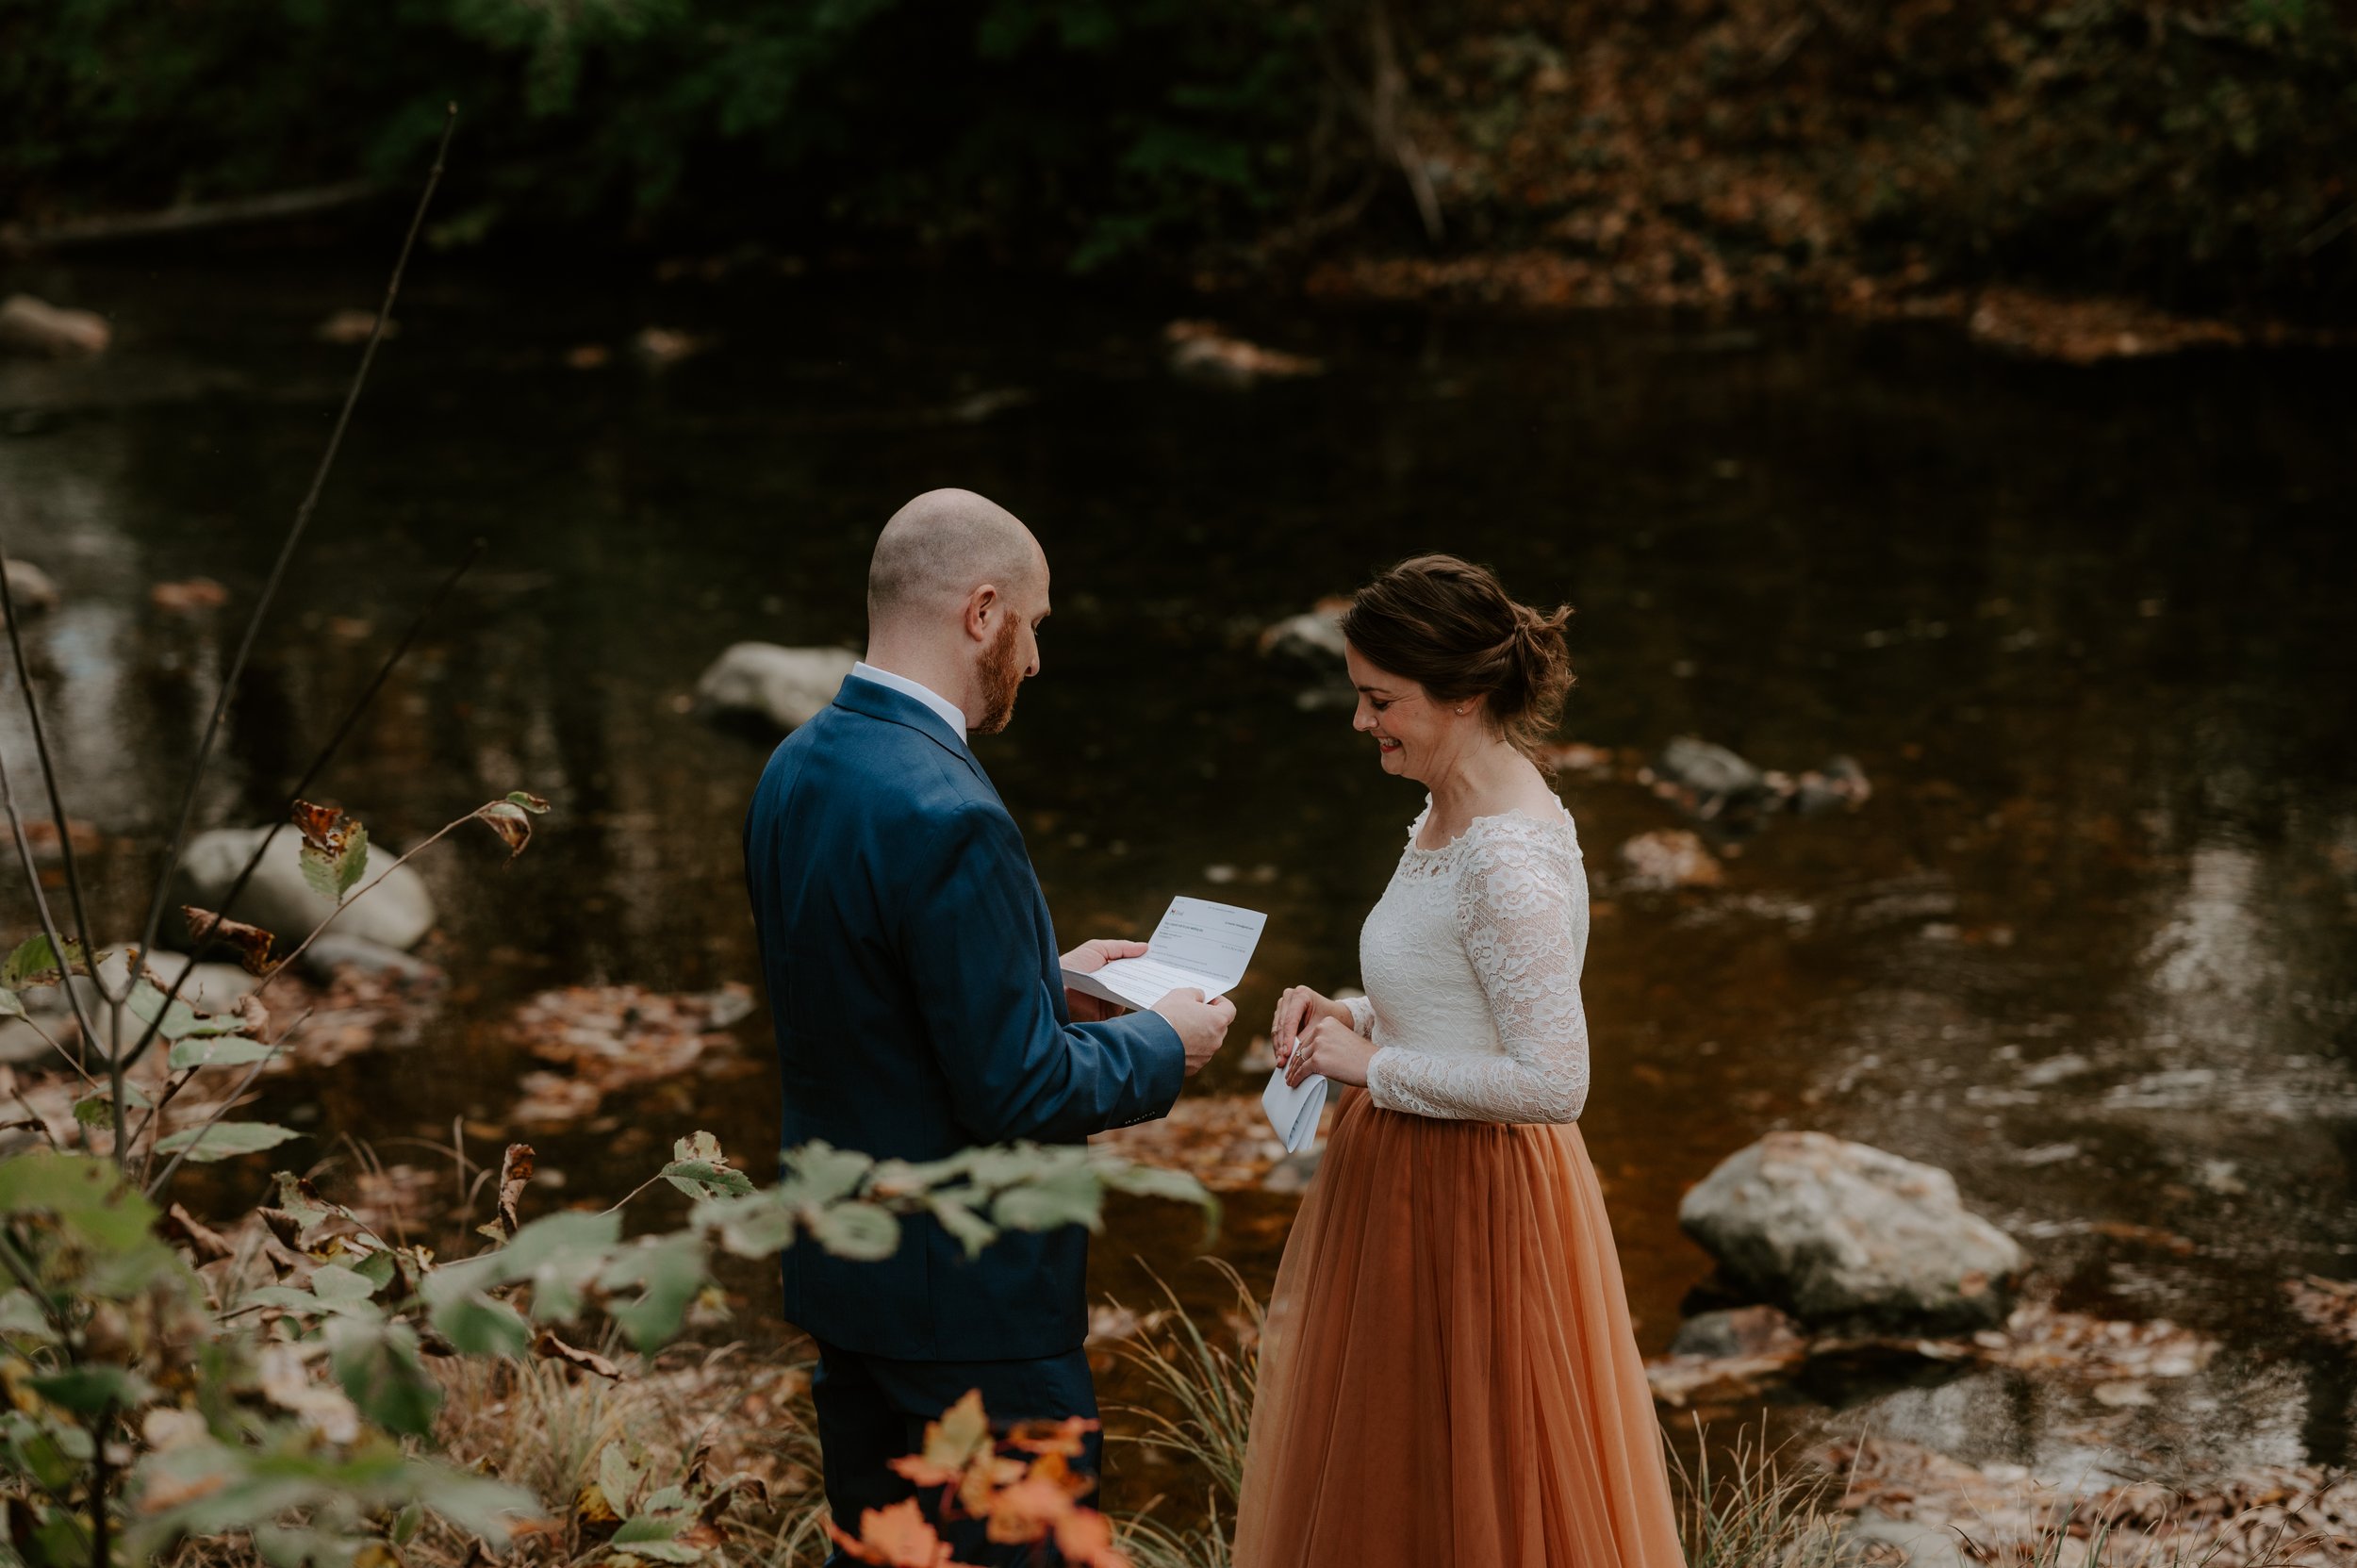 Stowe Vermont wedding and elopement photographer. Stowe Vermont wedding and elopement photographer. Stowe Vermont wedding photographer. Trapp family lodge wedding photographer. Edson Hill wedding photographer. Topnotch wedding photographer. The Woodstock Inn wedding photographer 